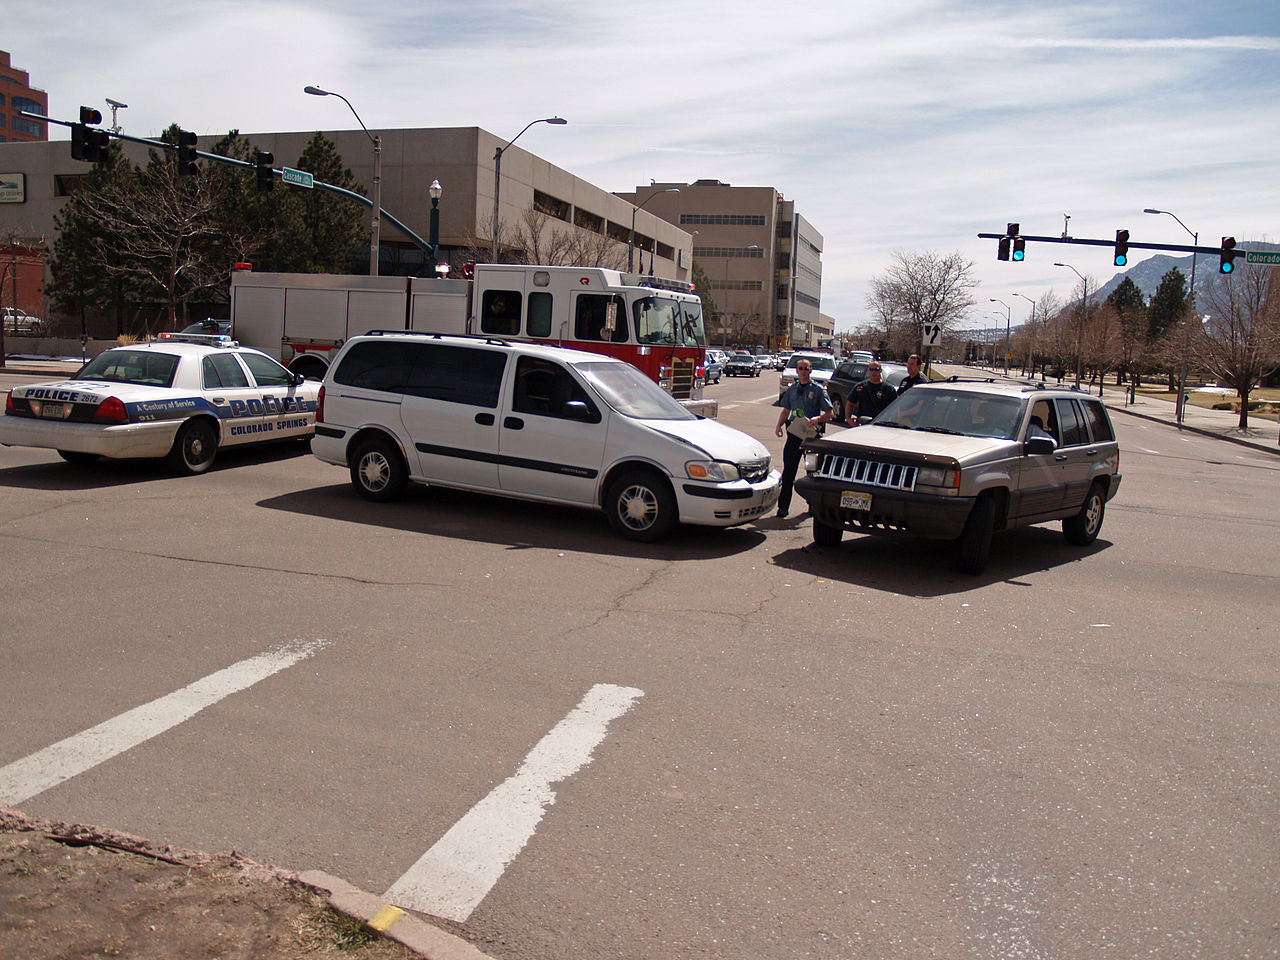 1280px-Car_Accident_in_Colorado_Springs_by_David_Shankbone